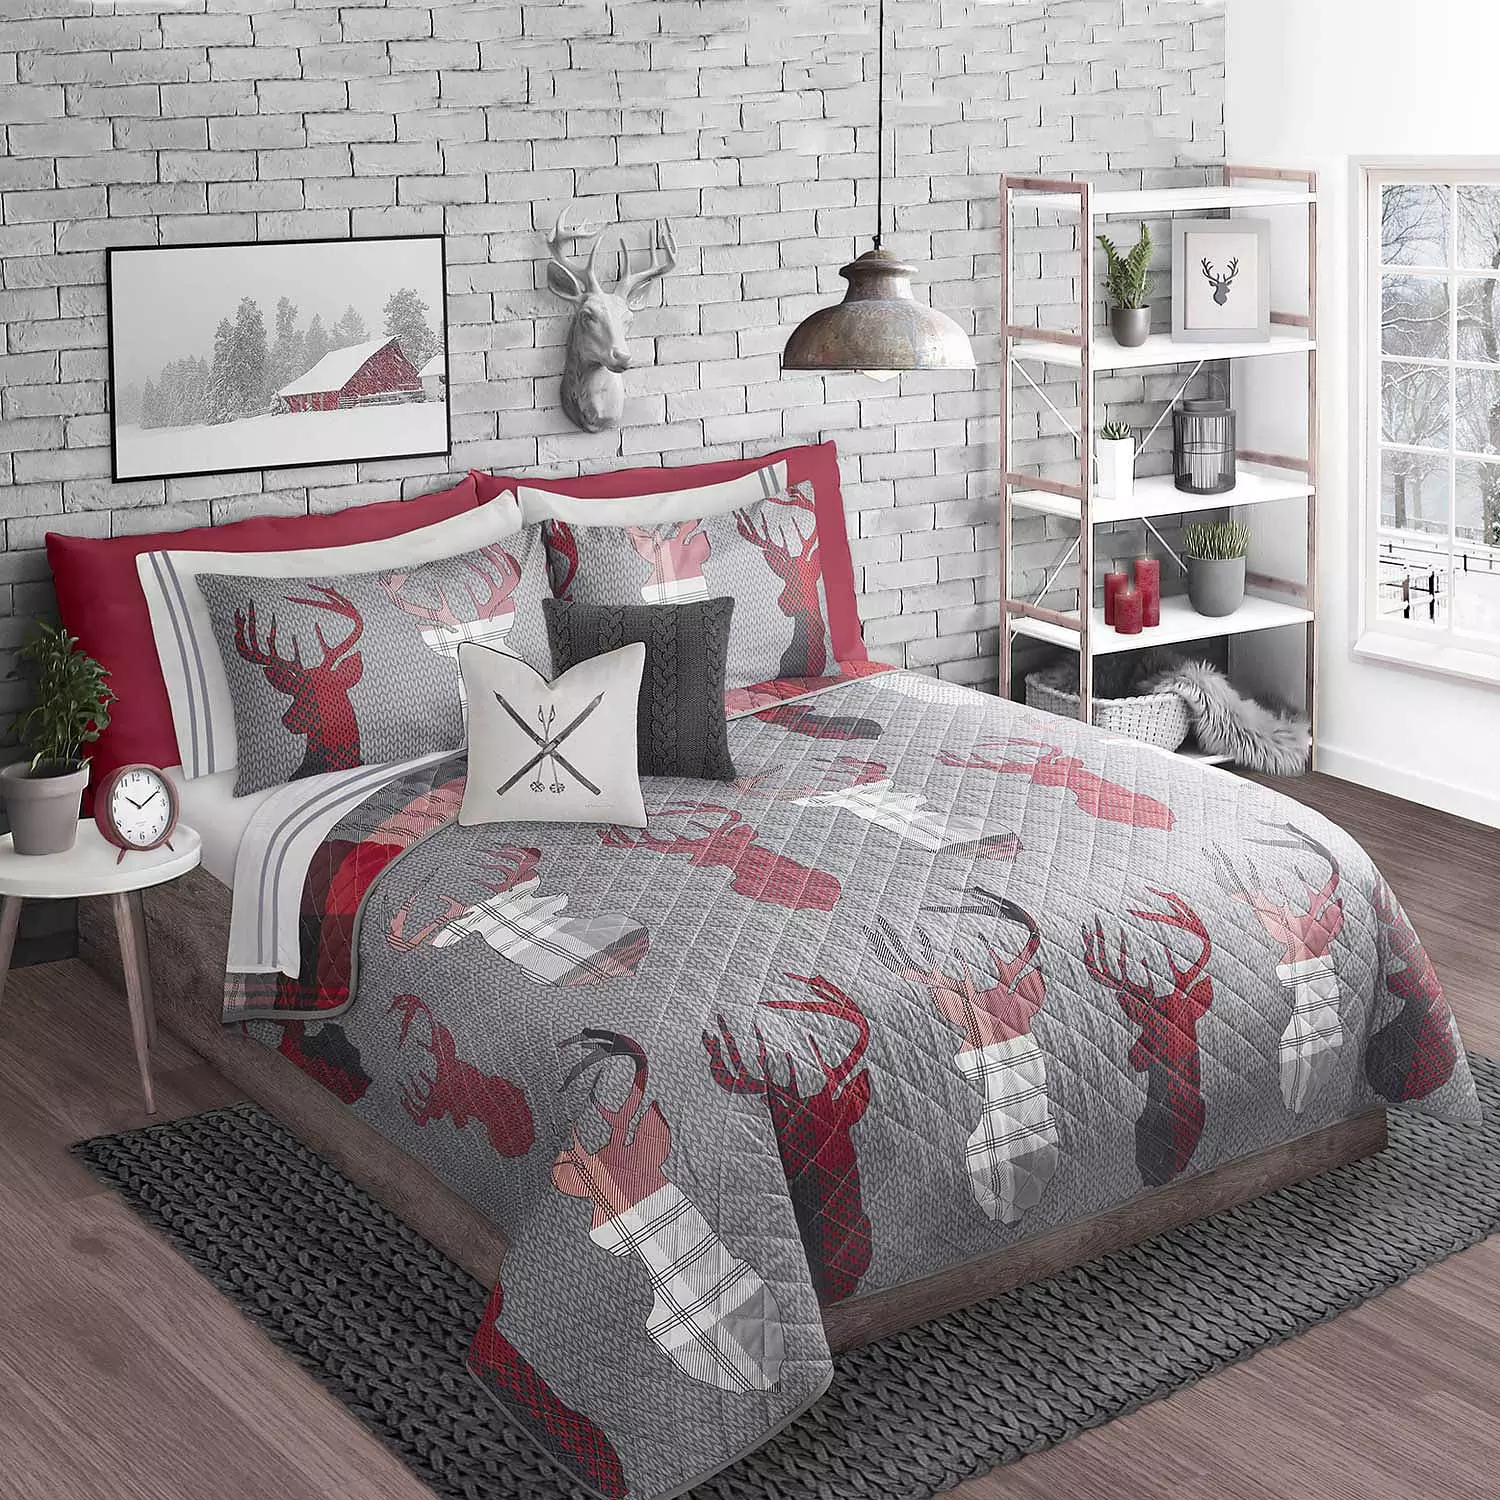 Lodge themed reversible quilt set, moose heads/plaid pattern, king